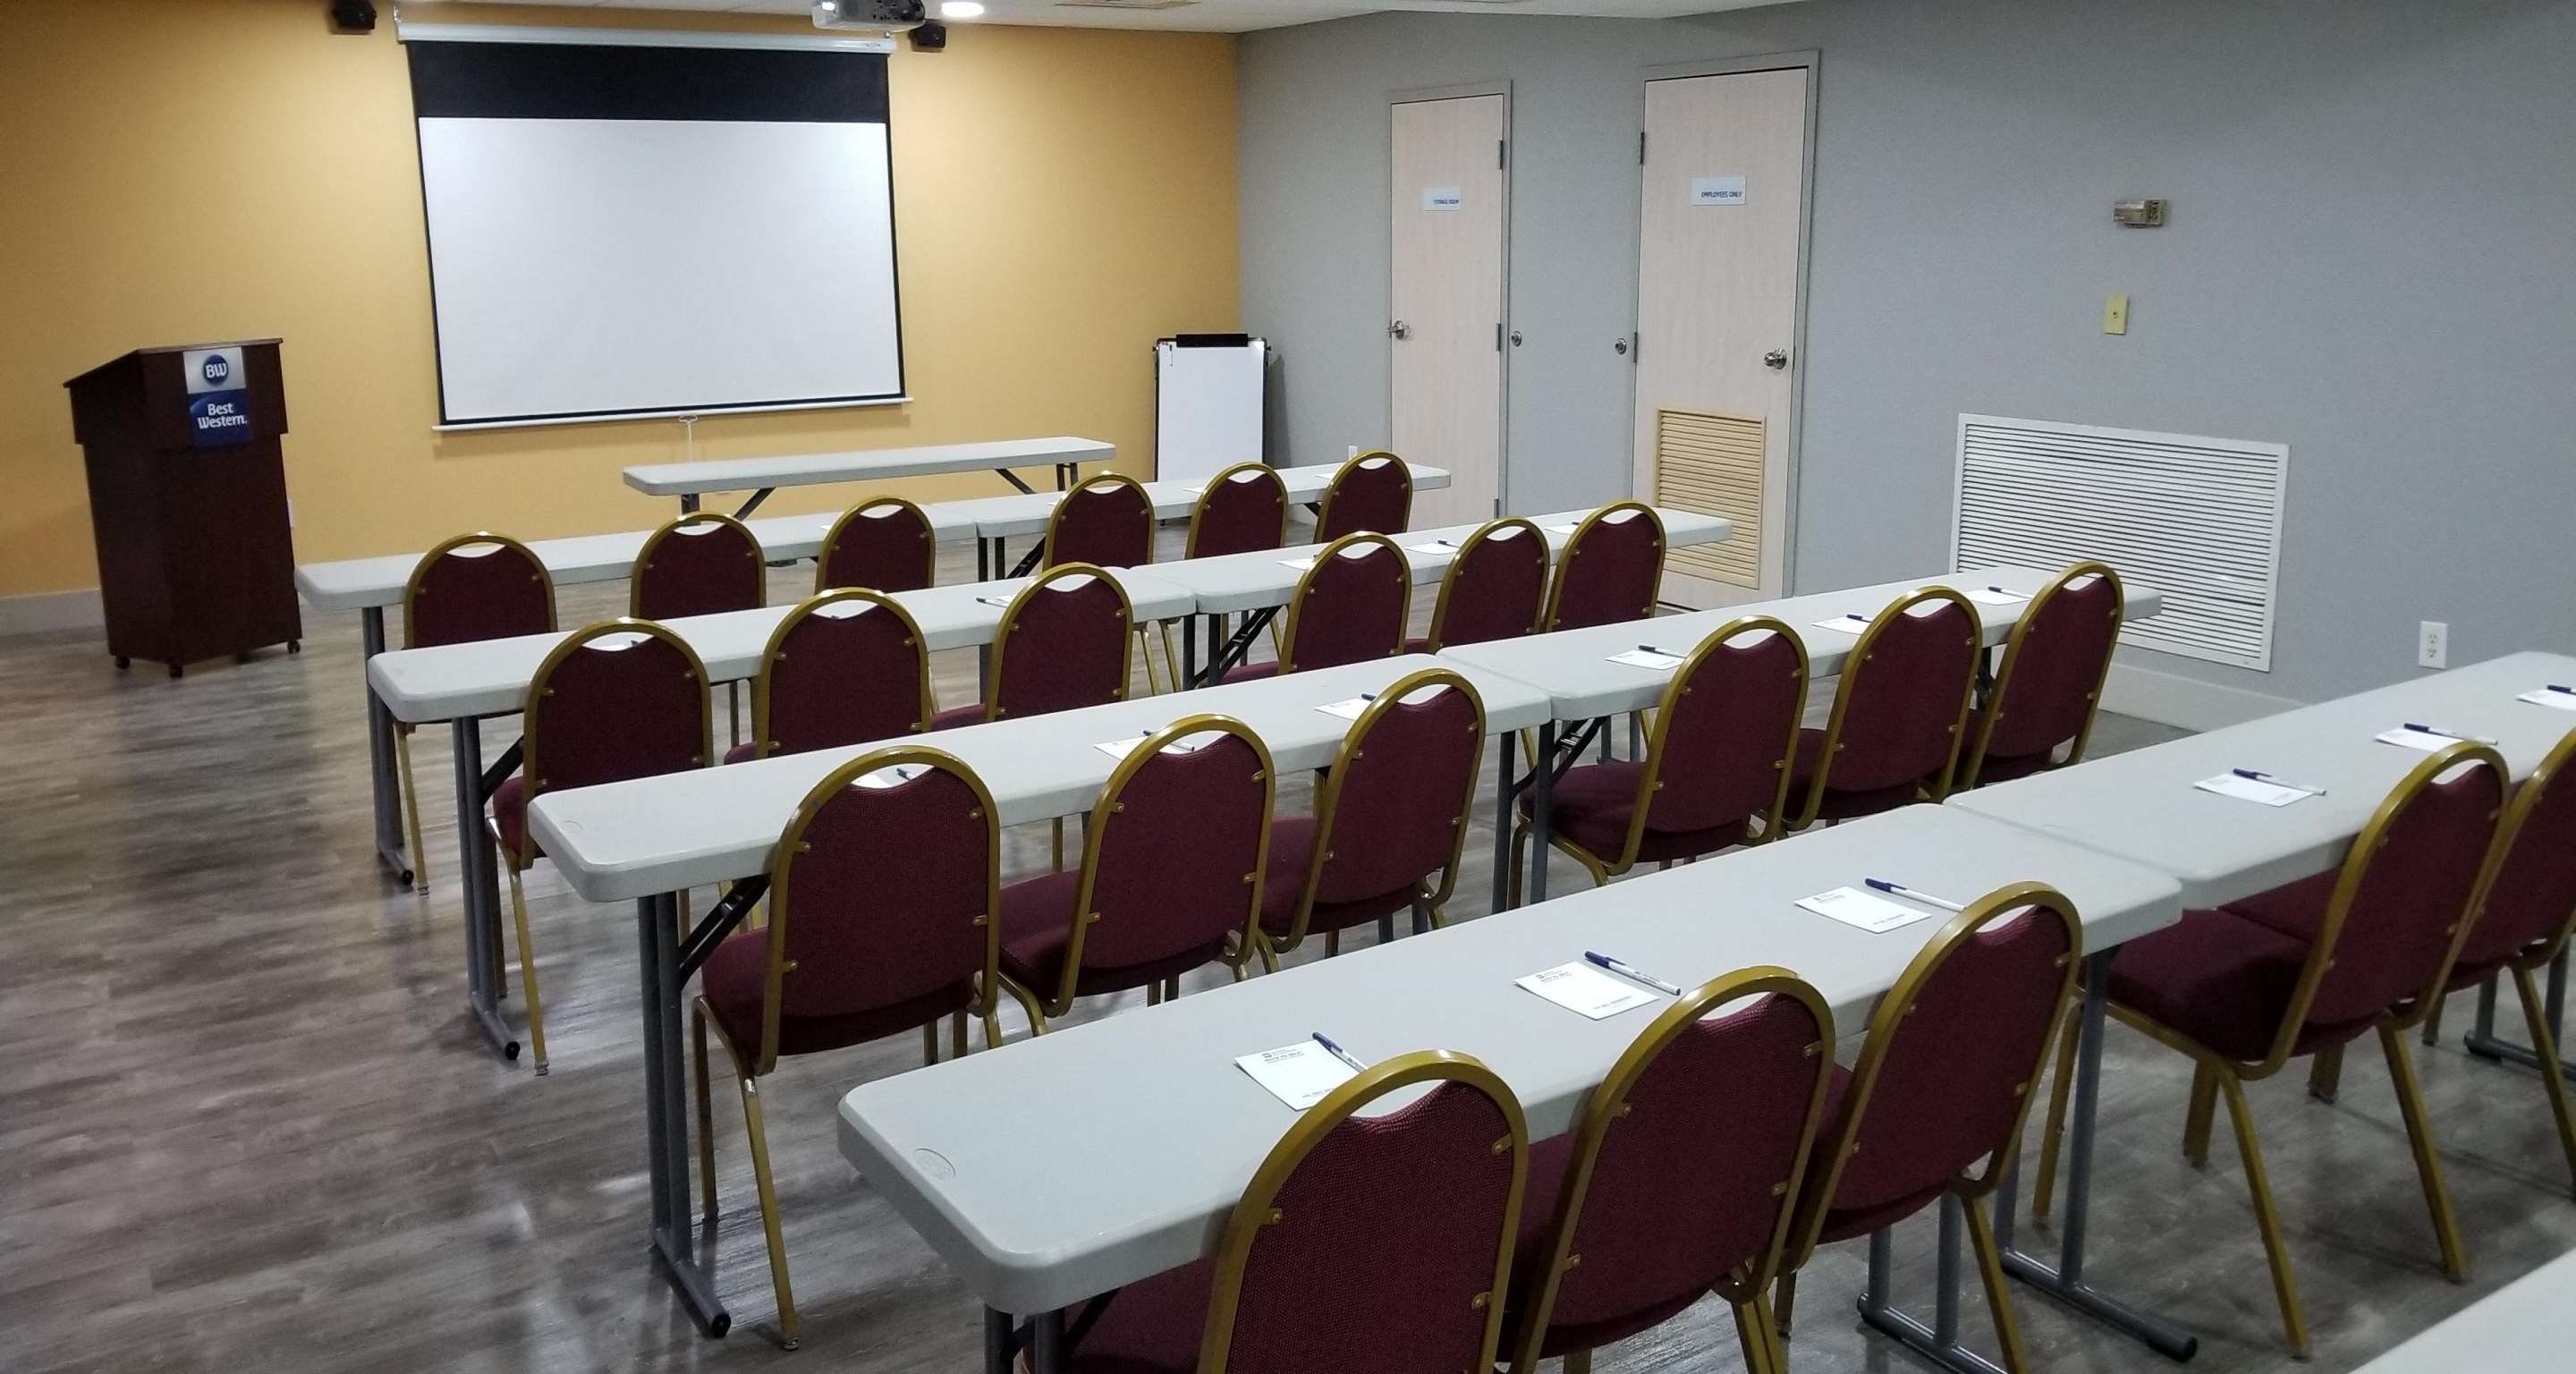 Book our meeting room for your meeting or party Best Western Shallotte / Ocean Isle Beach Hotel Shallotte (910)754-3044